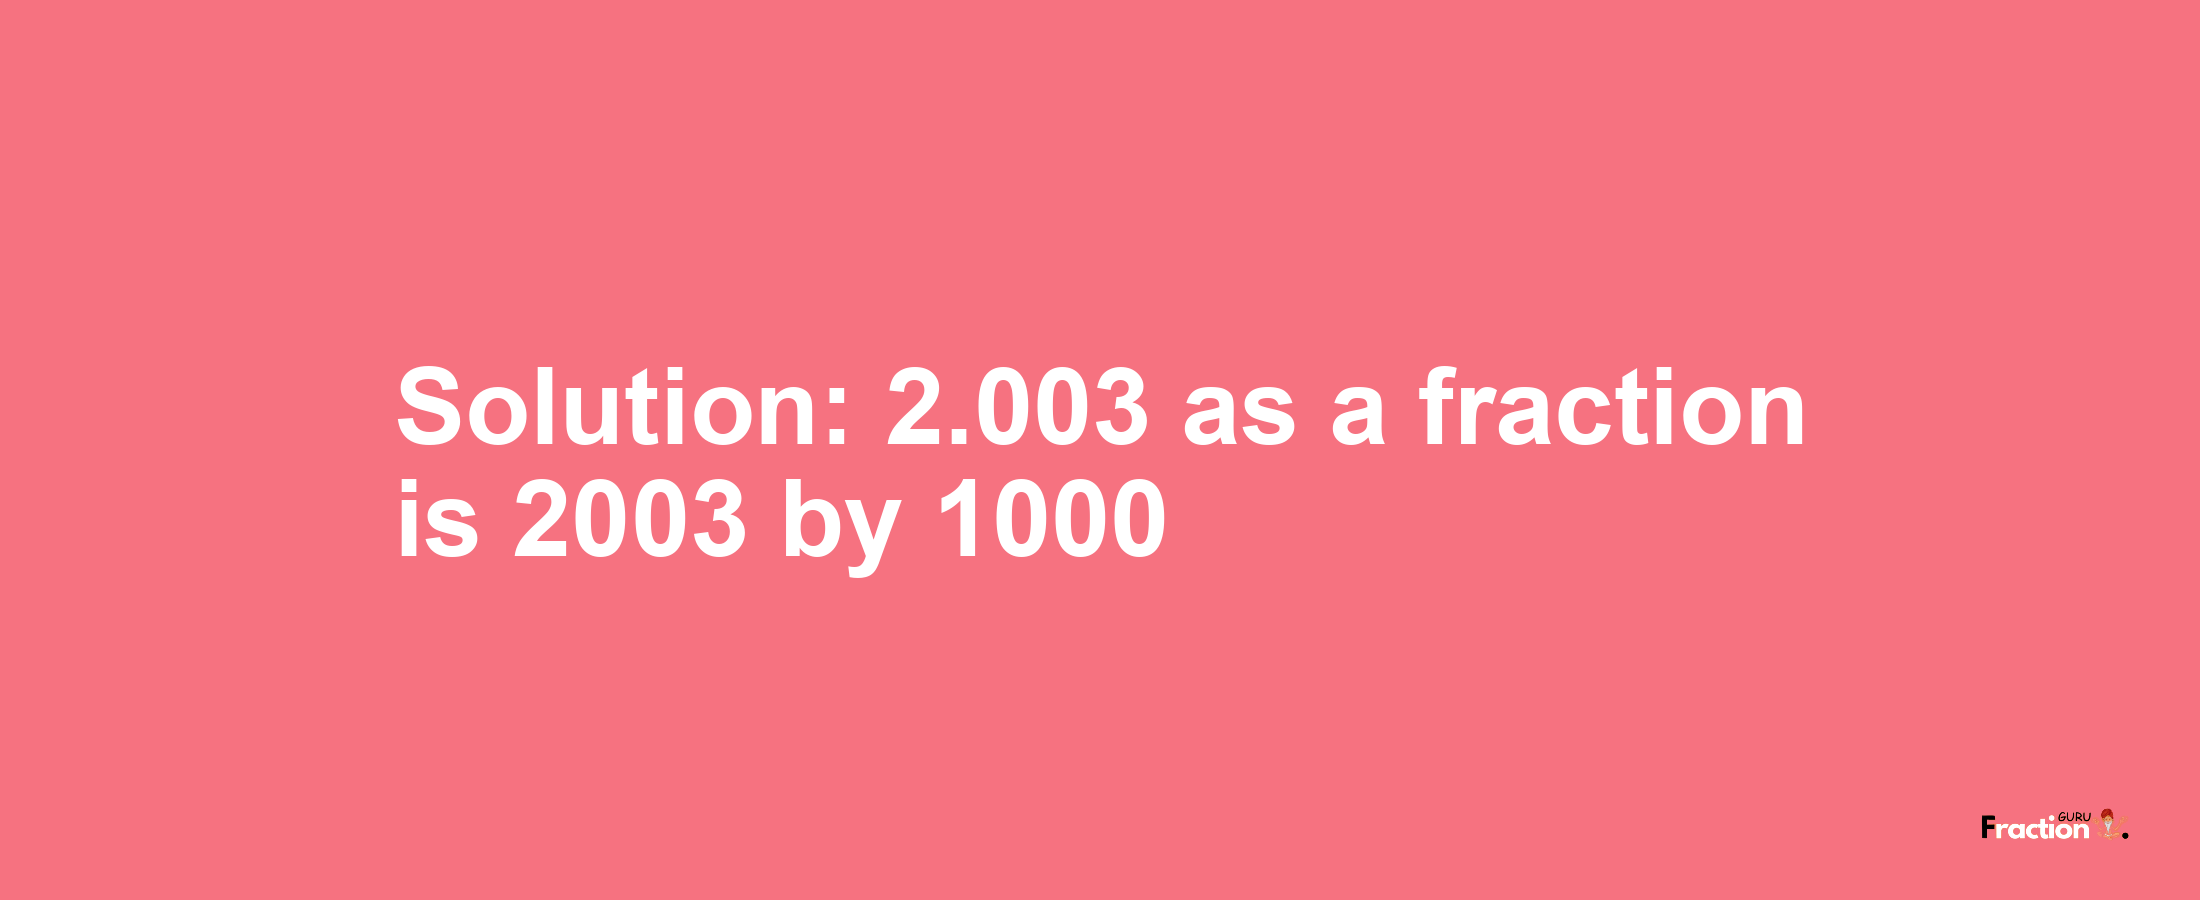 Solution:2.003 as a fraction is 2003/1000